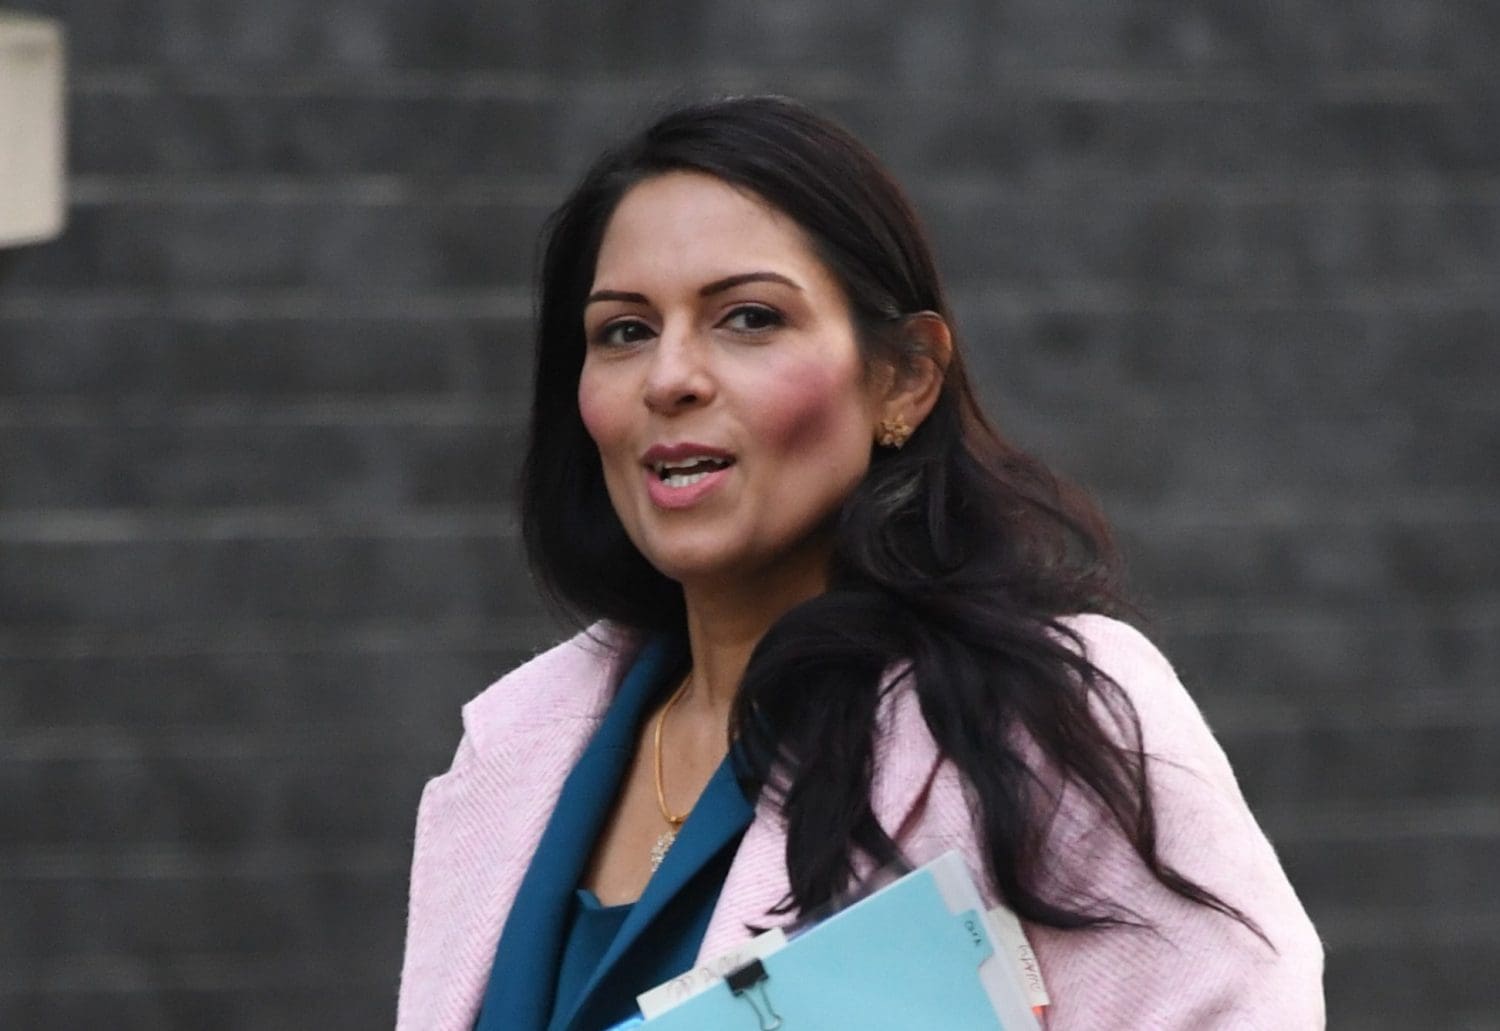 Home Office Insider Accuses Priti Patel Of Frequently Encouraging Behaviour Outside The Rule Of 